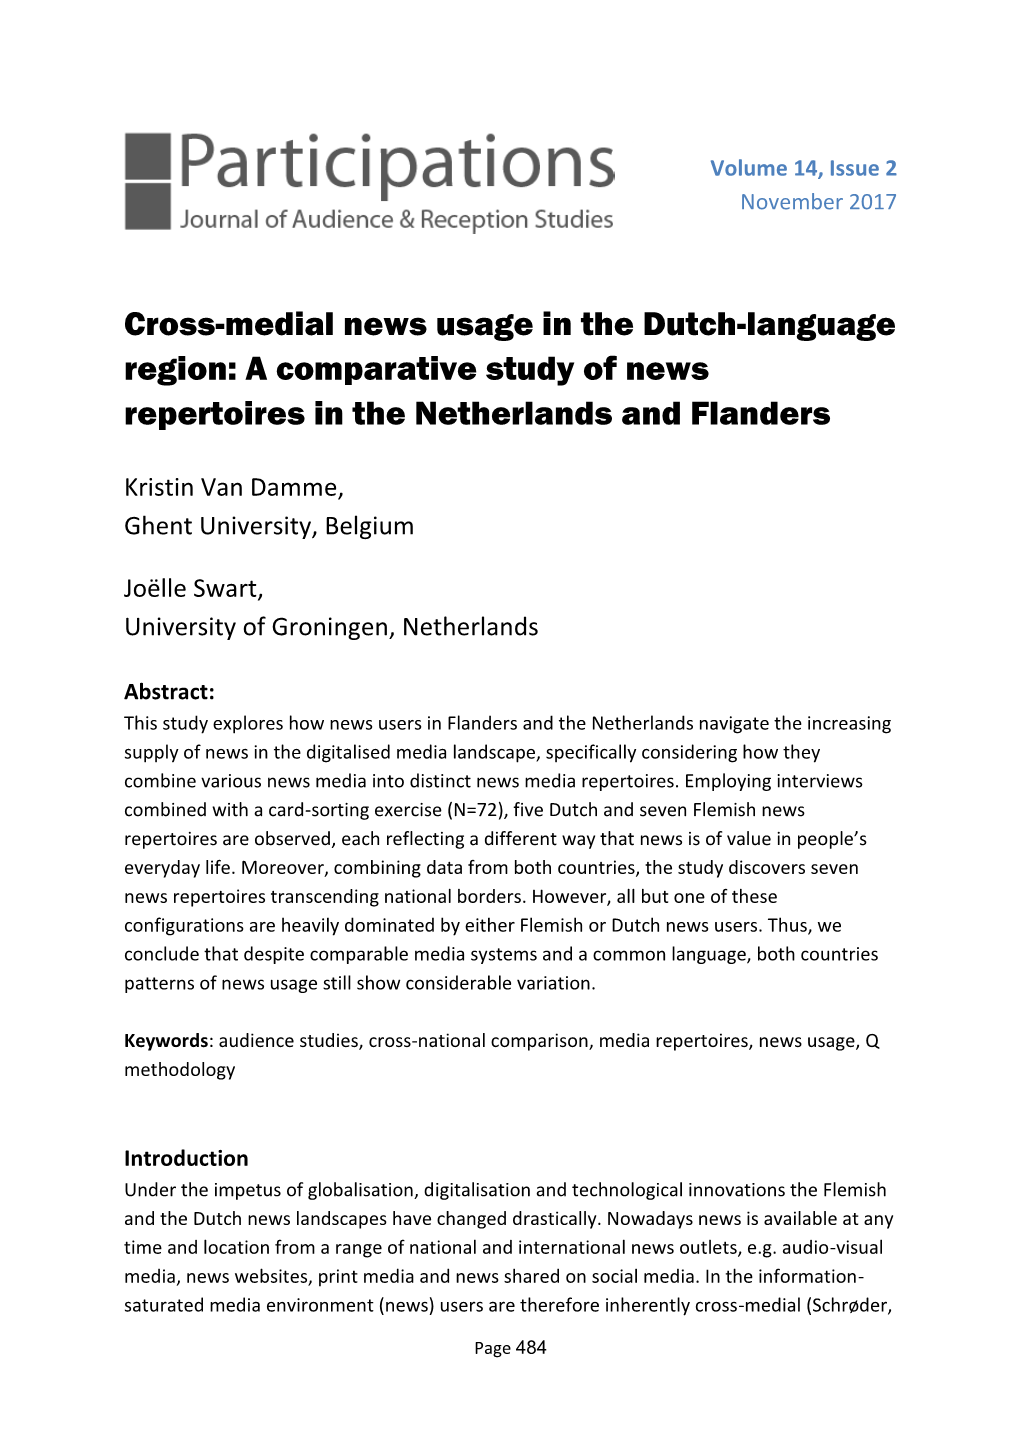 Cross-Medial News Usage in the Dutch-Language Region: a Comparative Study of News Repertoires in the Netherlands and Flanders